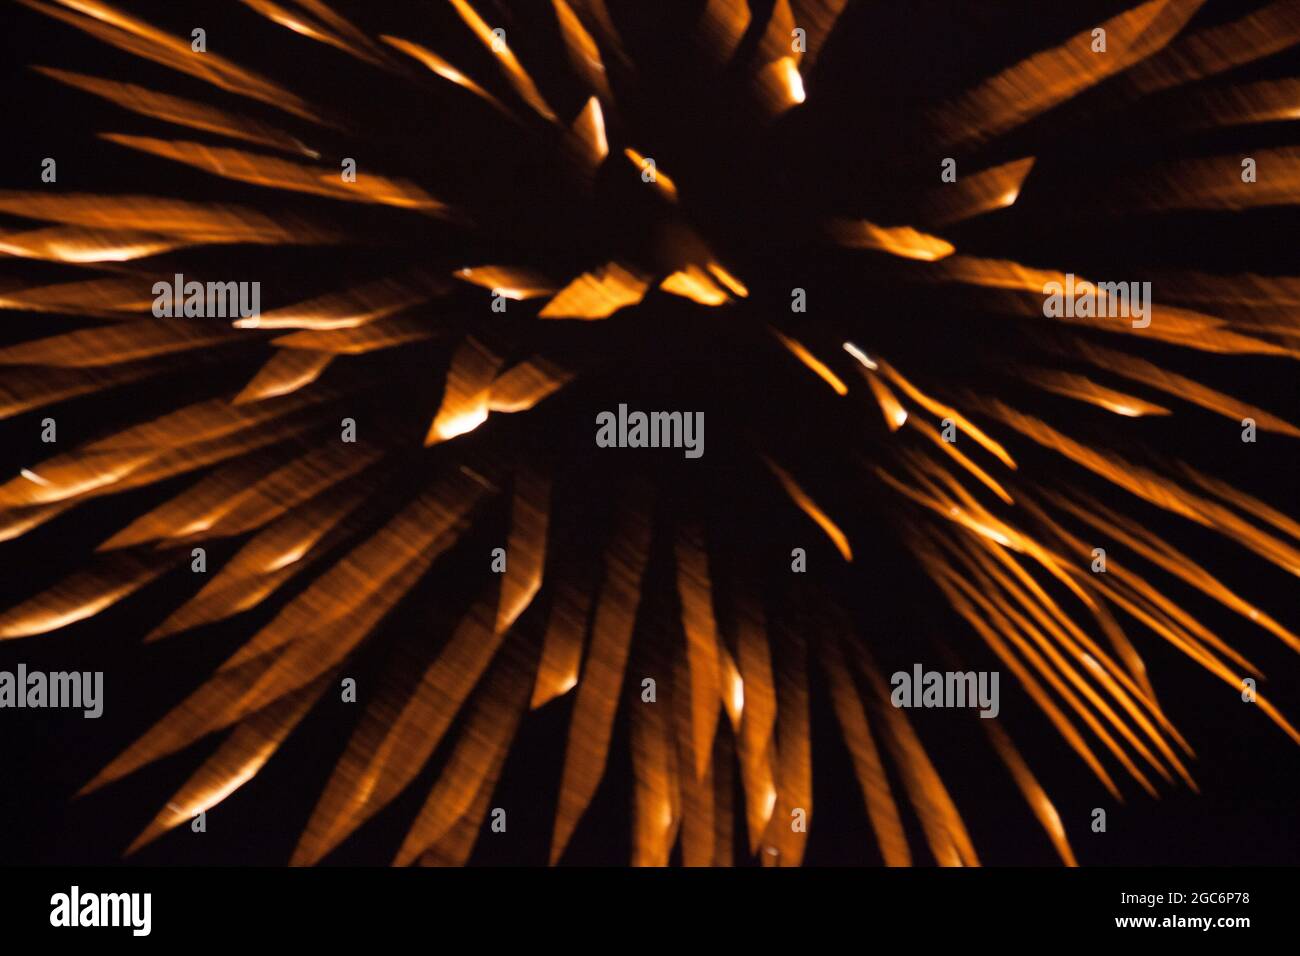 Exploding firework producing a beautiful cascading colourful display Stock Photo